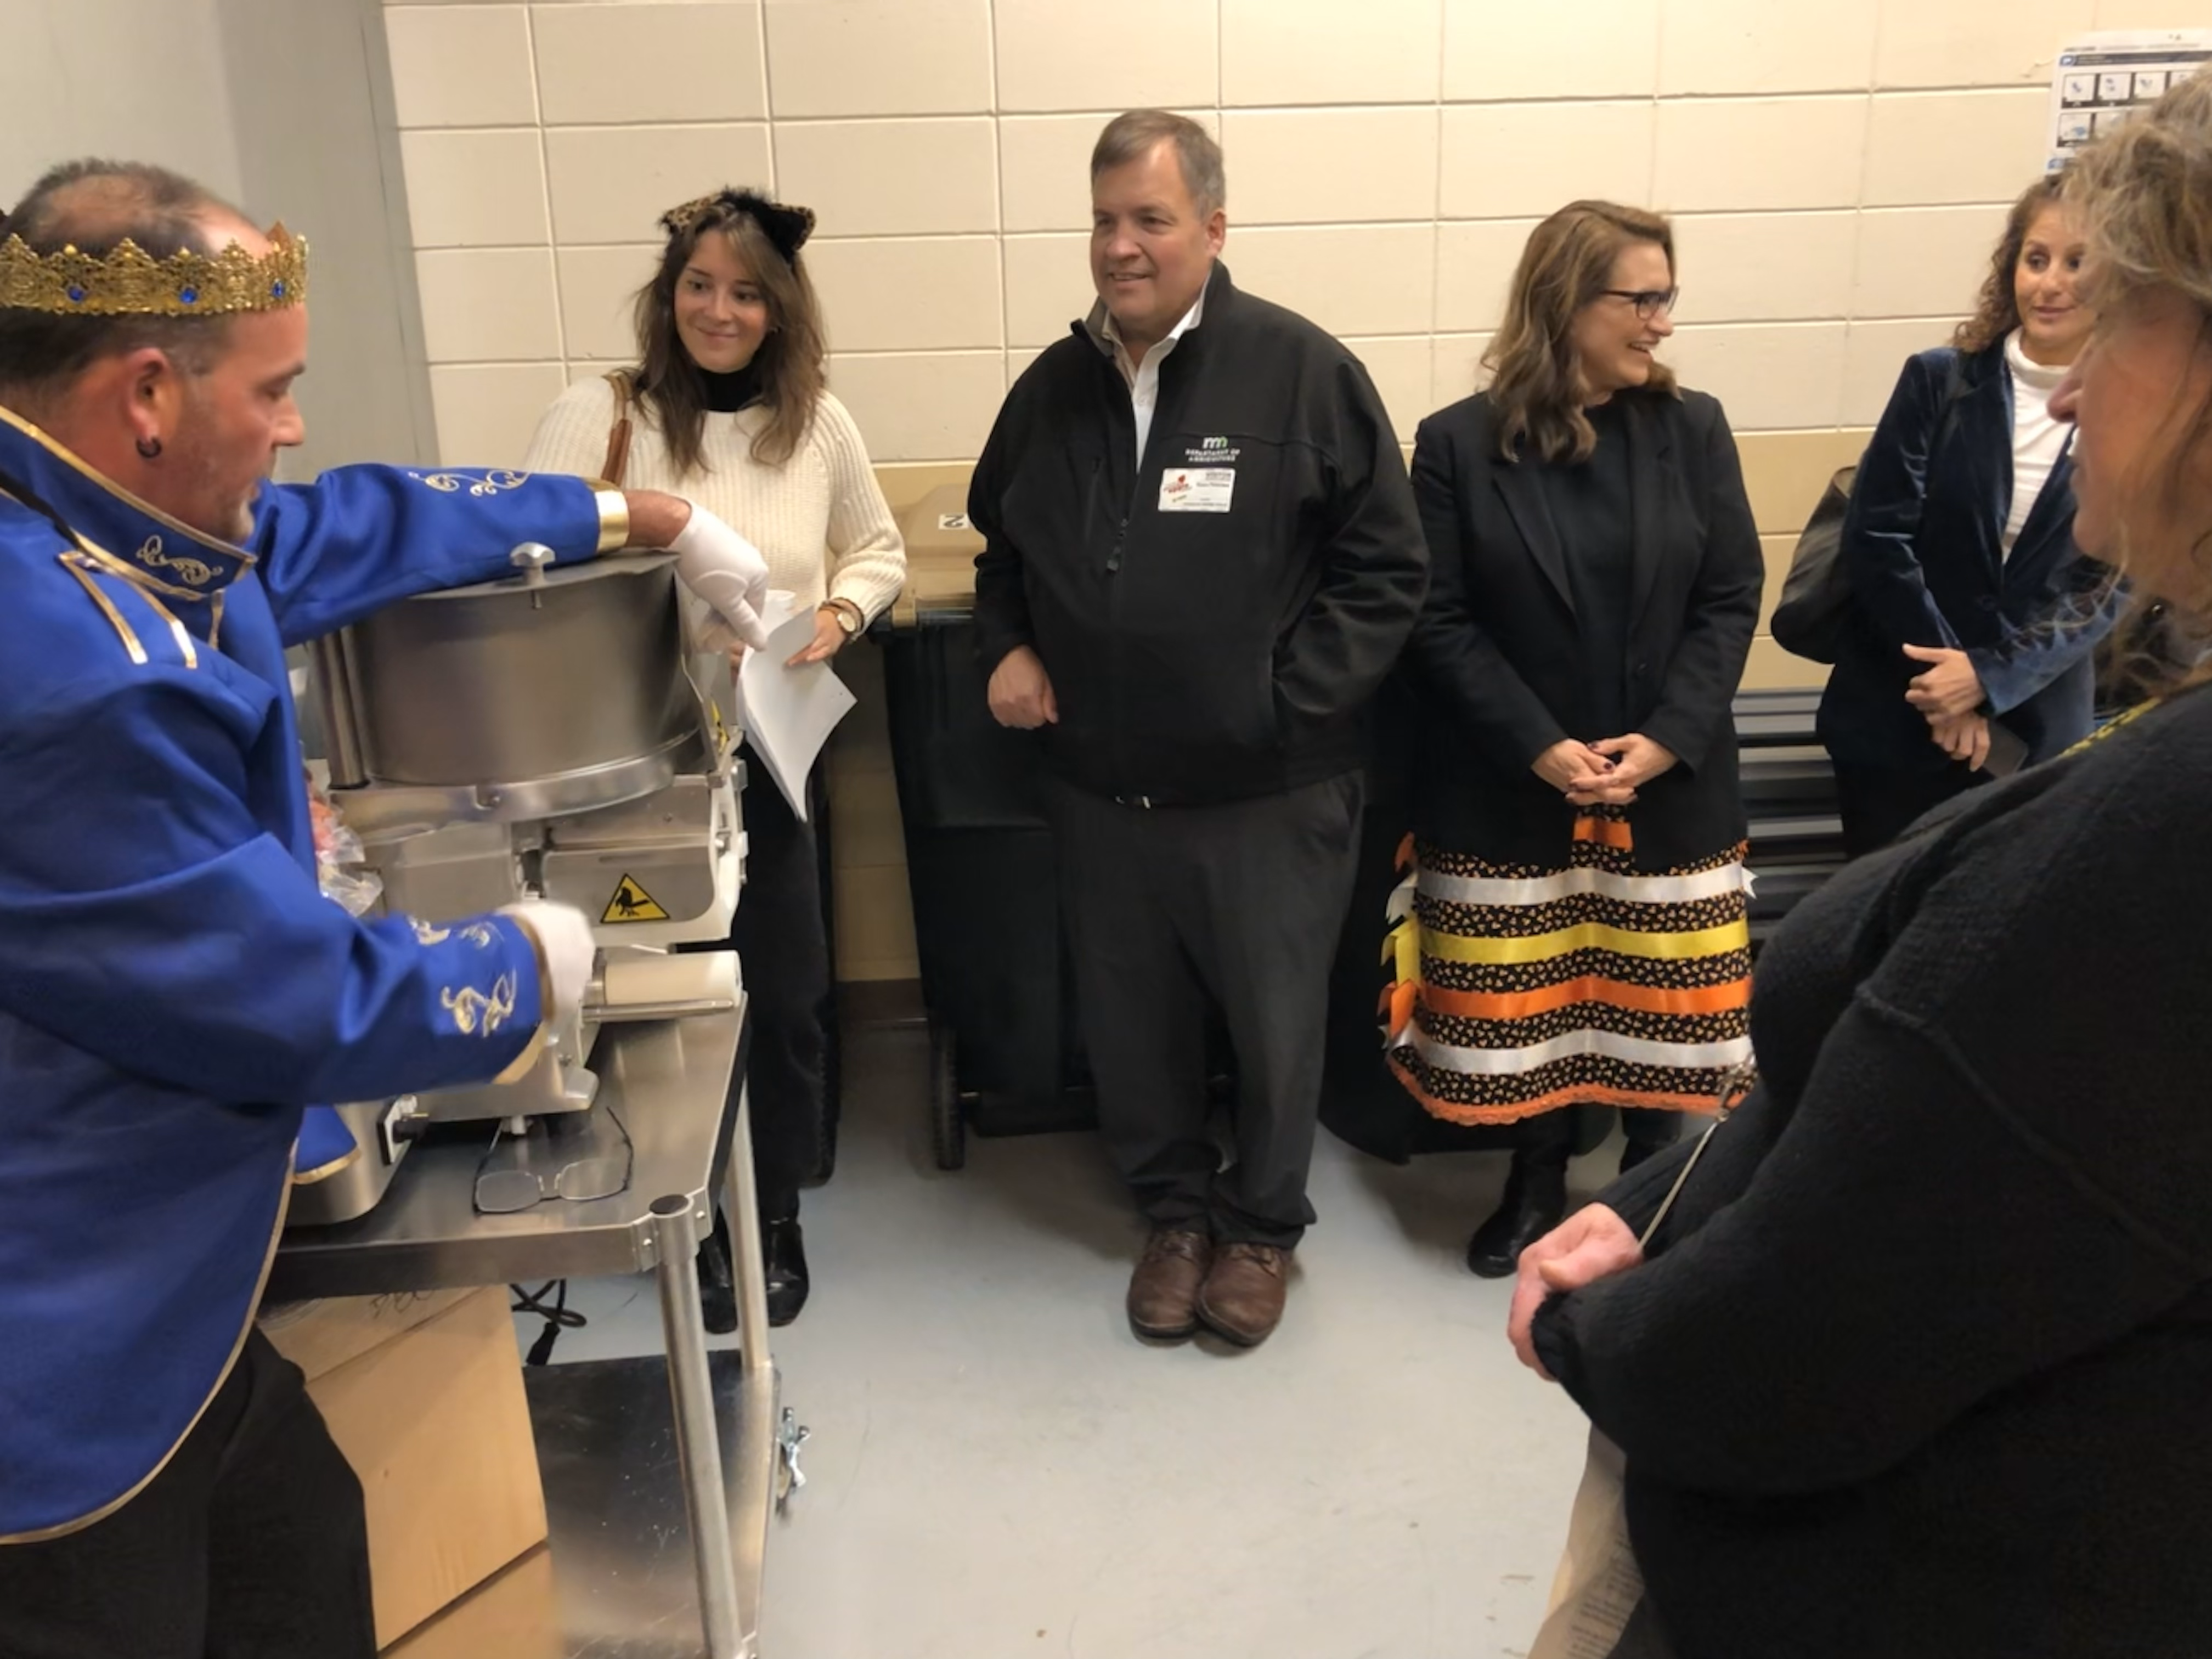 At a Halloween Farm to School Month event, kitchen staff at Hutchinson Middle School show MDA Commissioner Thom Petersen and Lt. Governor Peggy Flanagan kitchen eqipment purchased with a Farm to School grant.